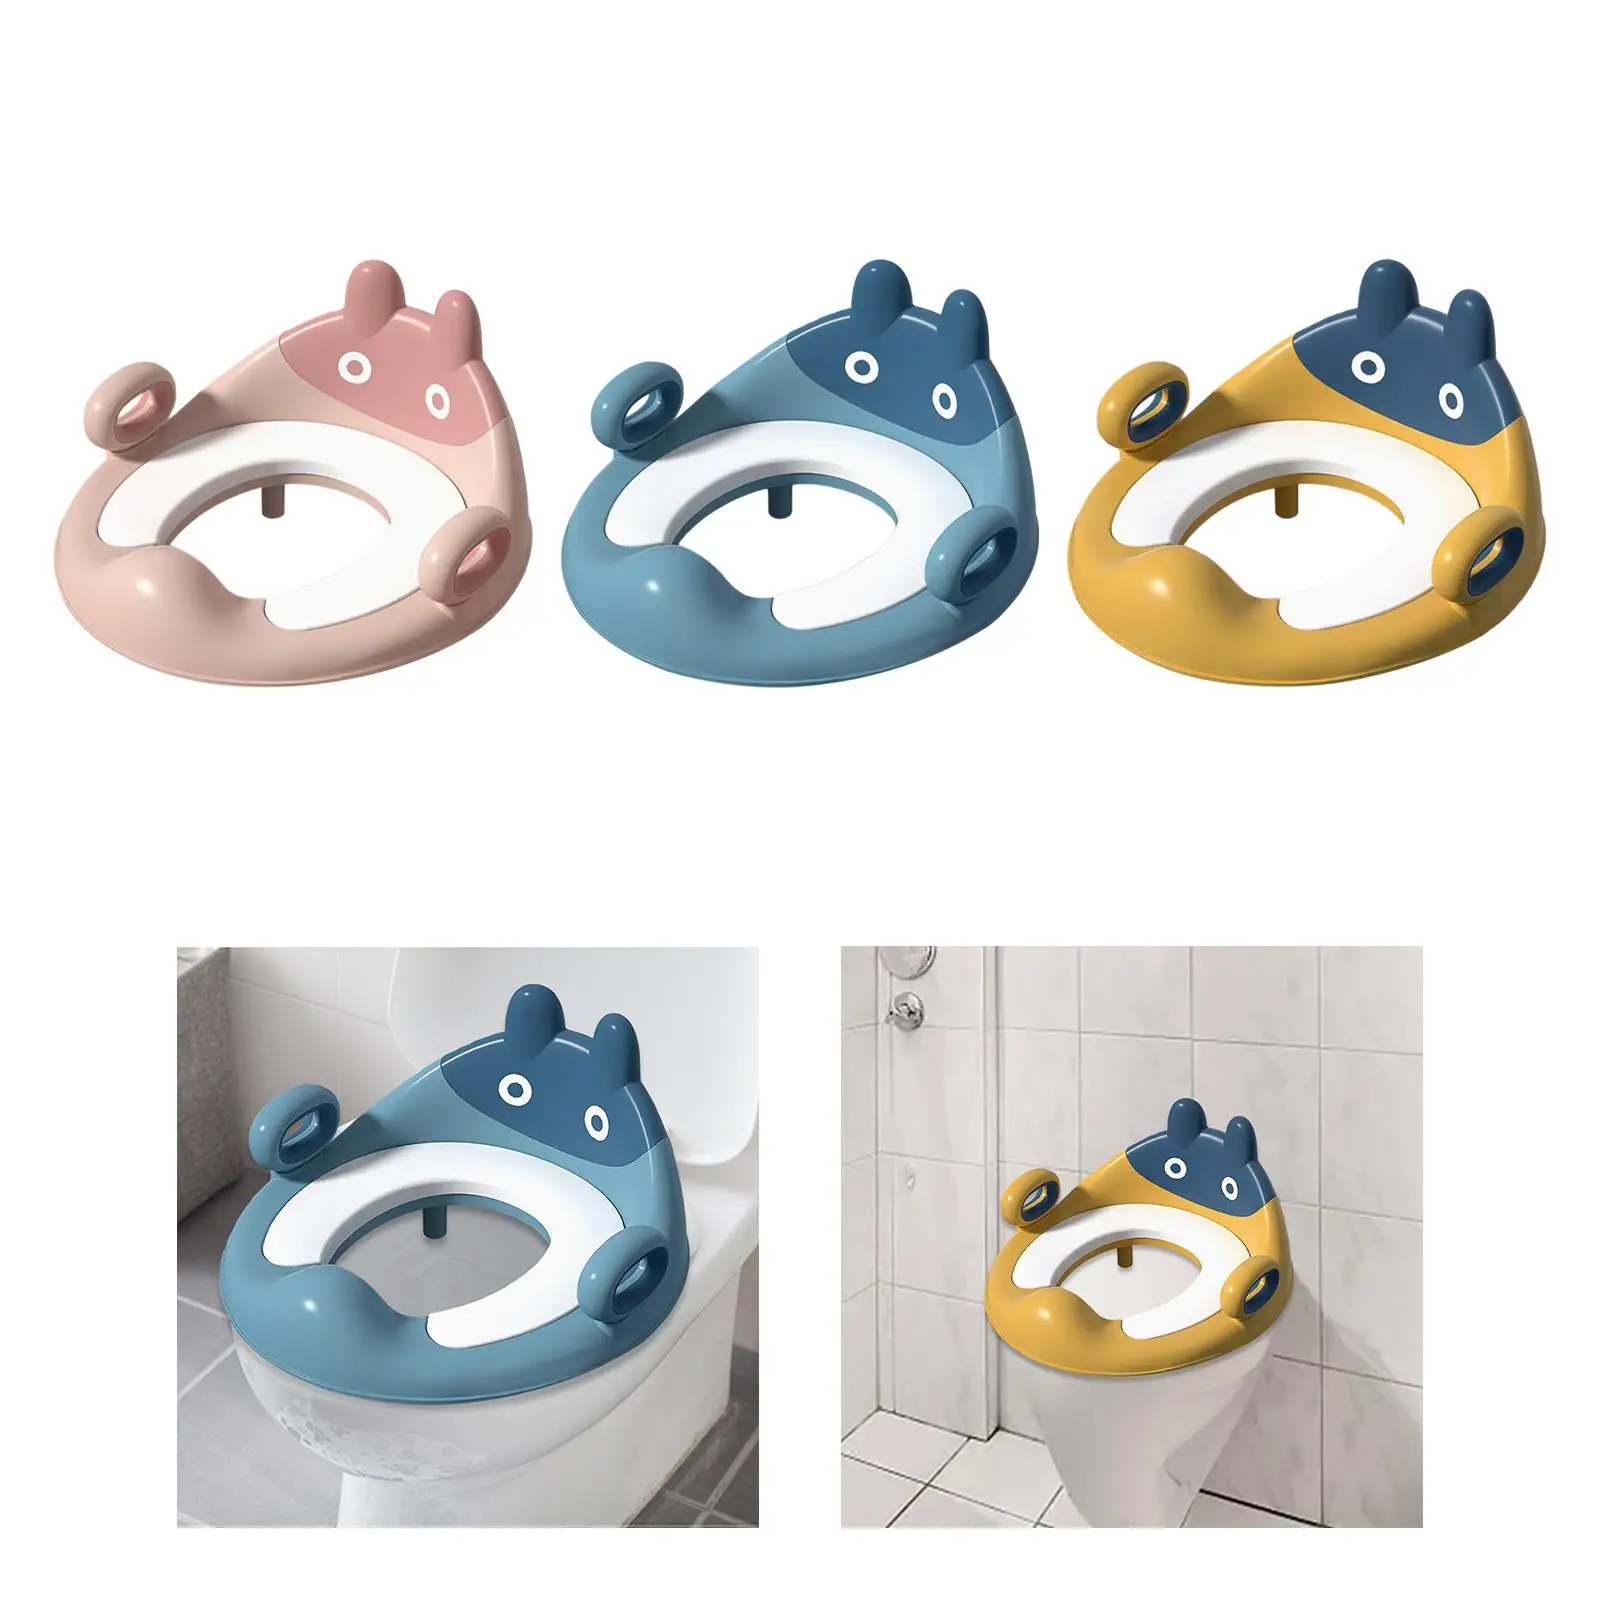 Potty Train Seat with Handles Fits Round & Oval Toilets Space Saving Comfortable Toilet Trainer Seat for Boy and Girl Kids Child